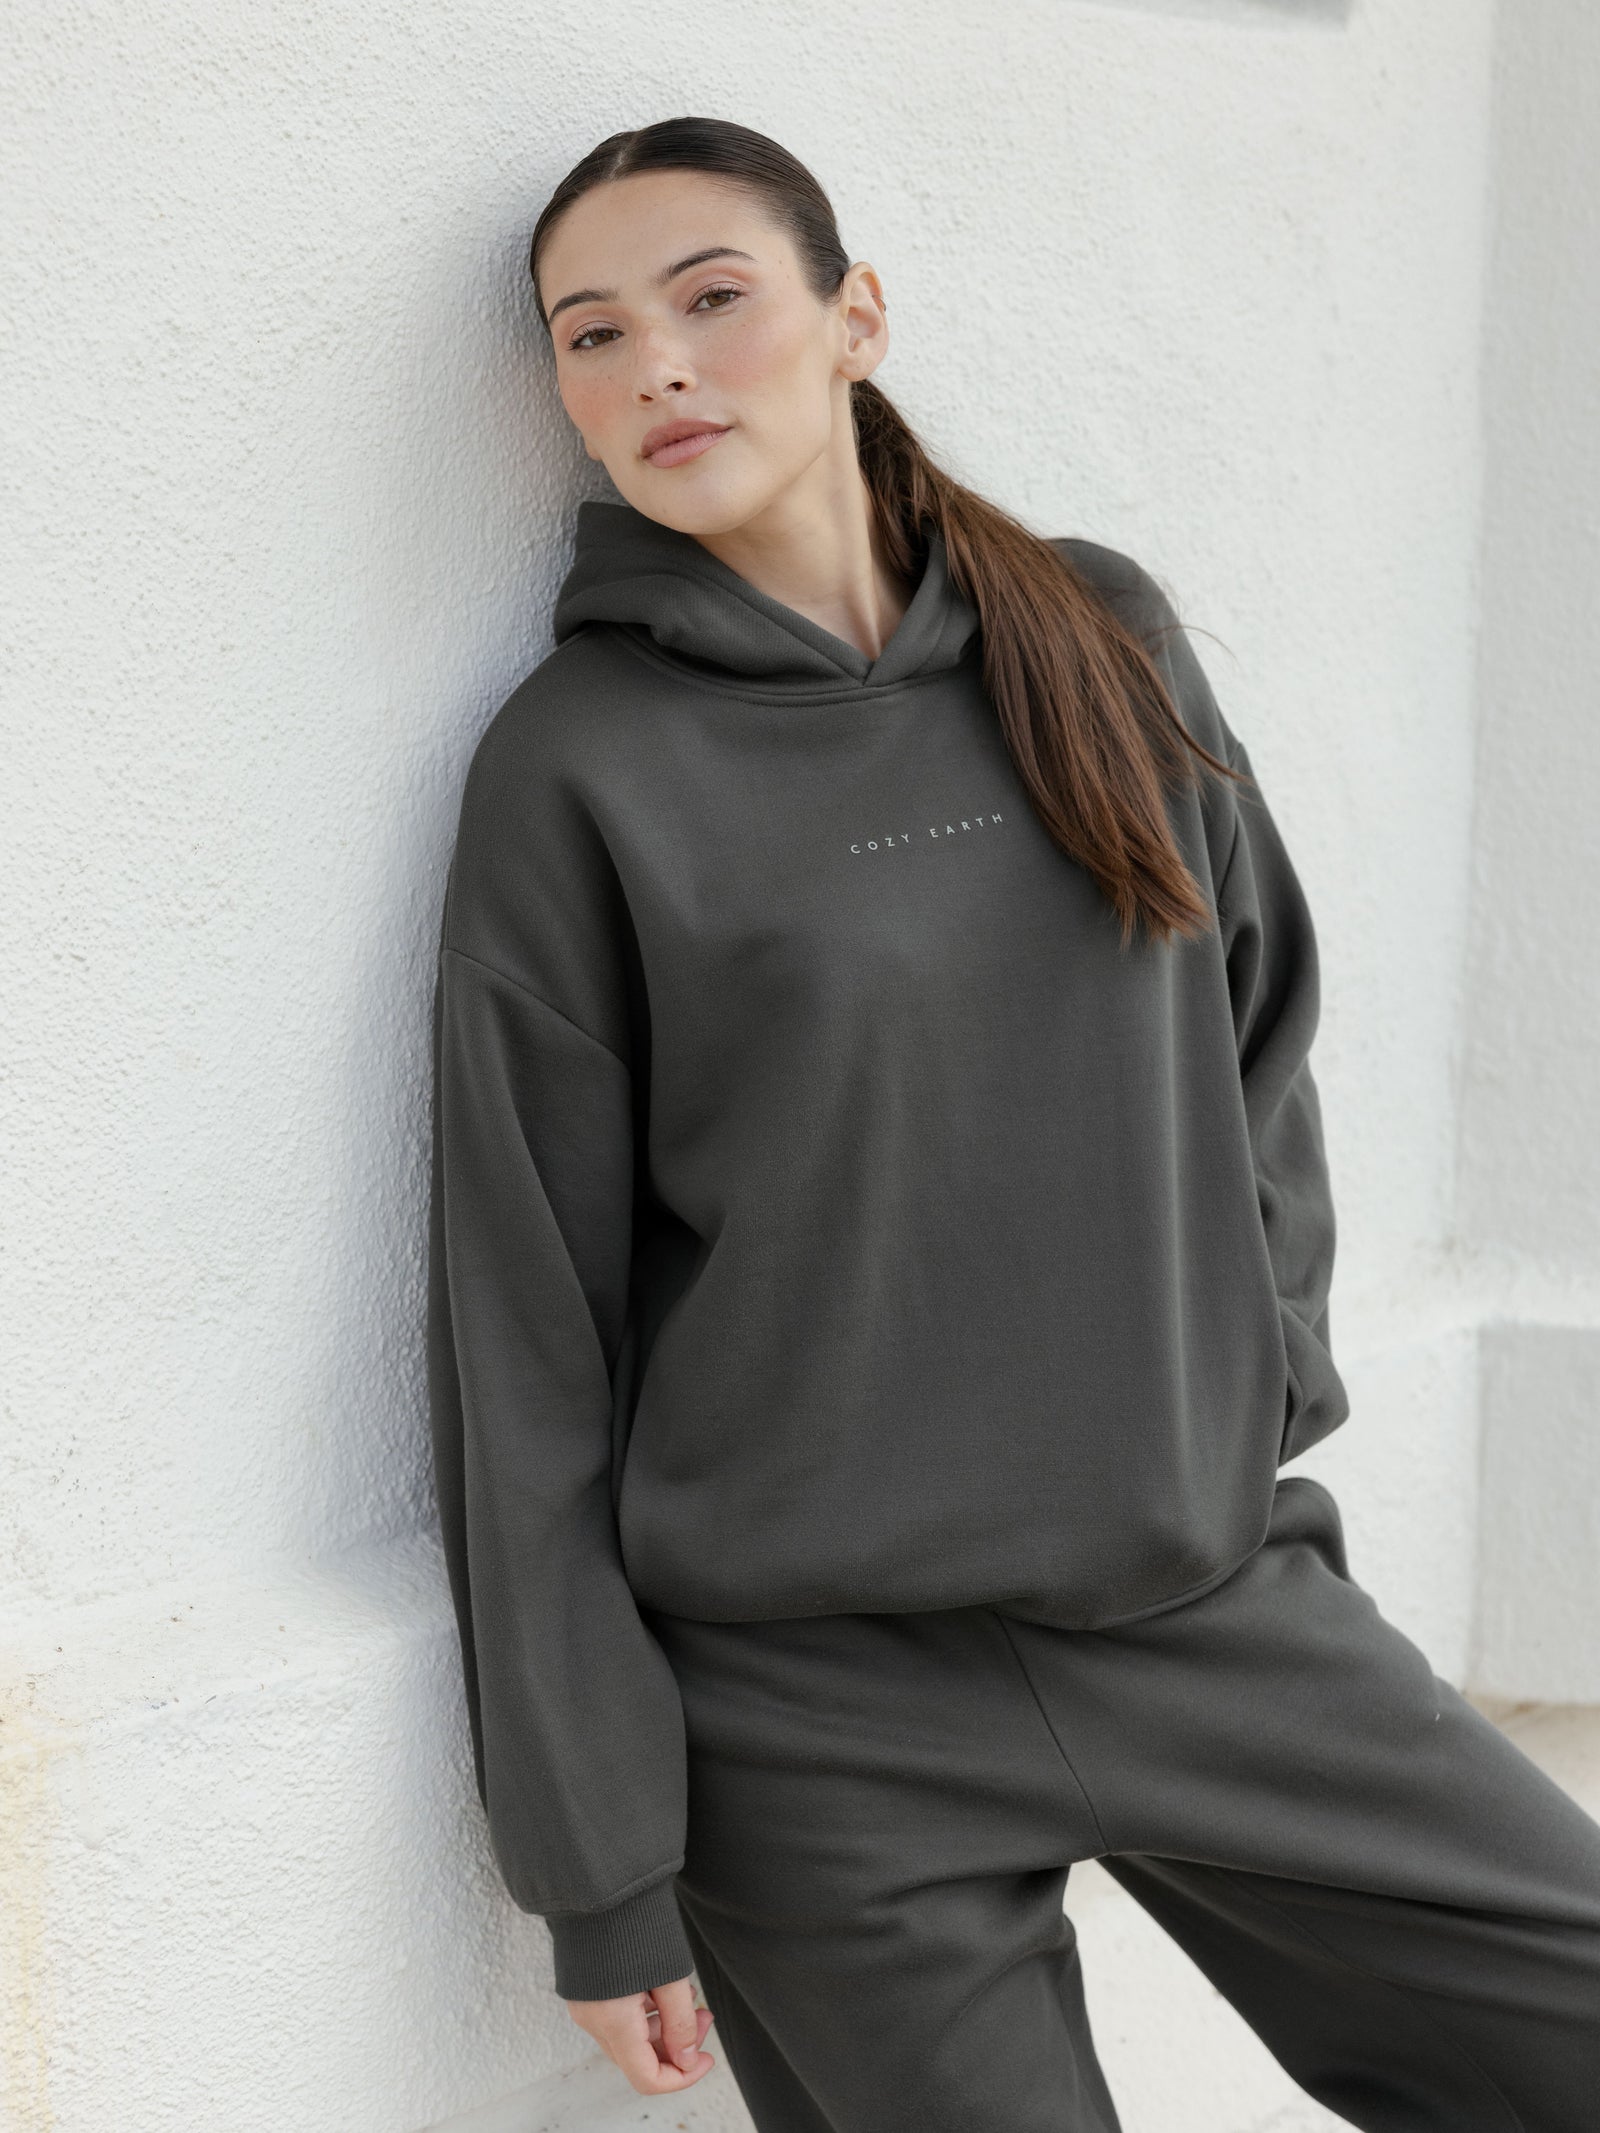 Woman in storm cityscape hoodie leaning against wall 